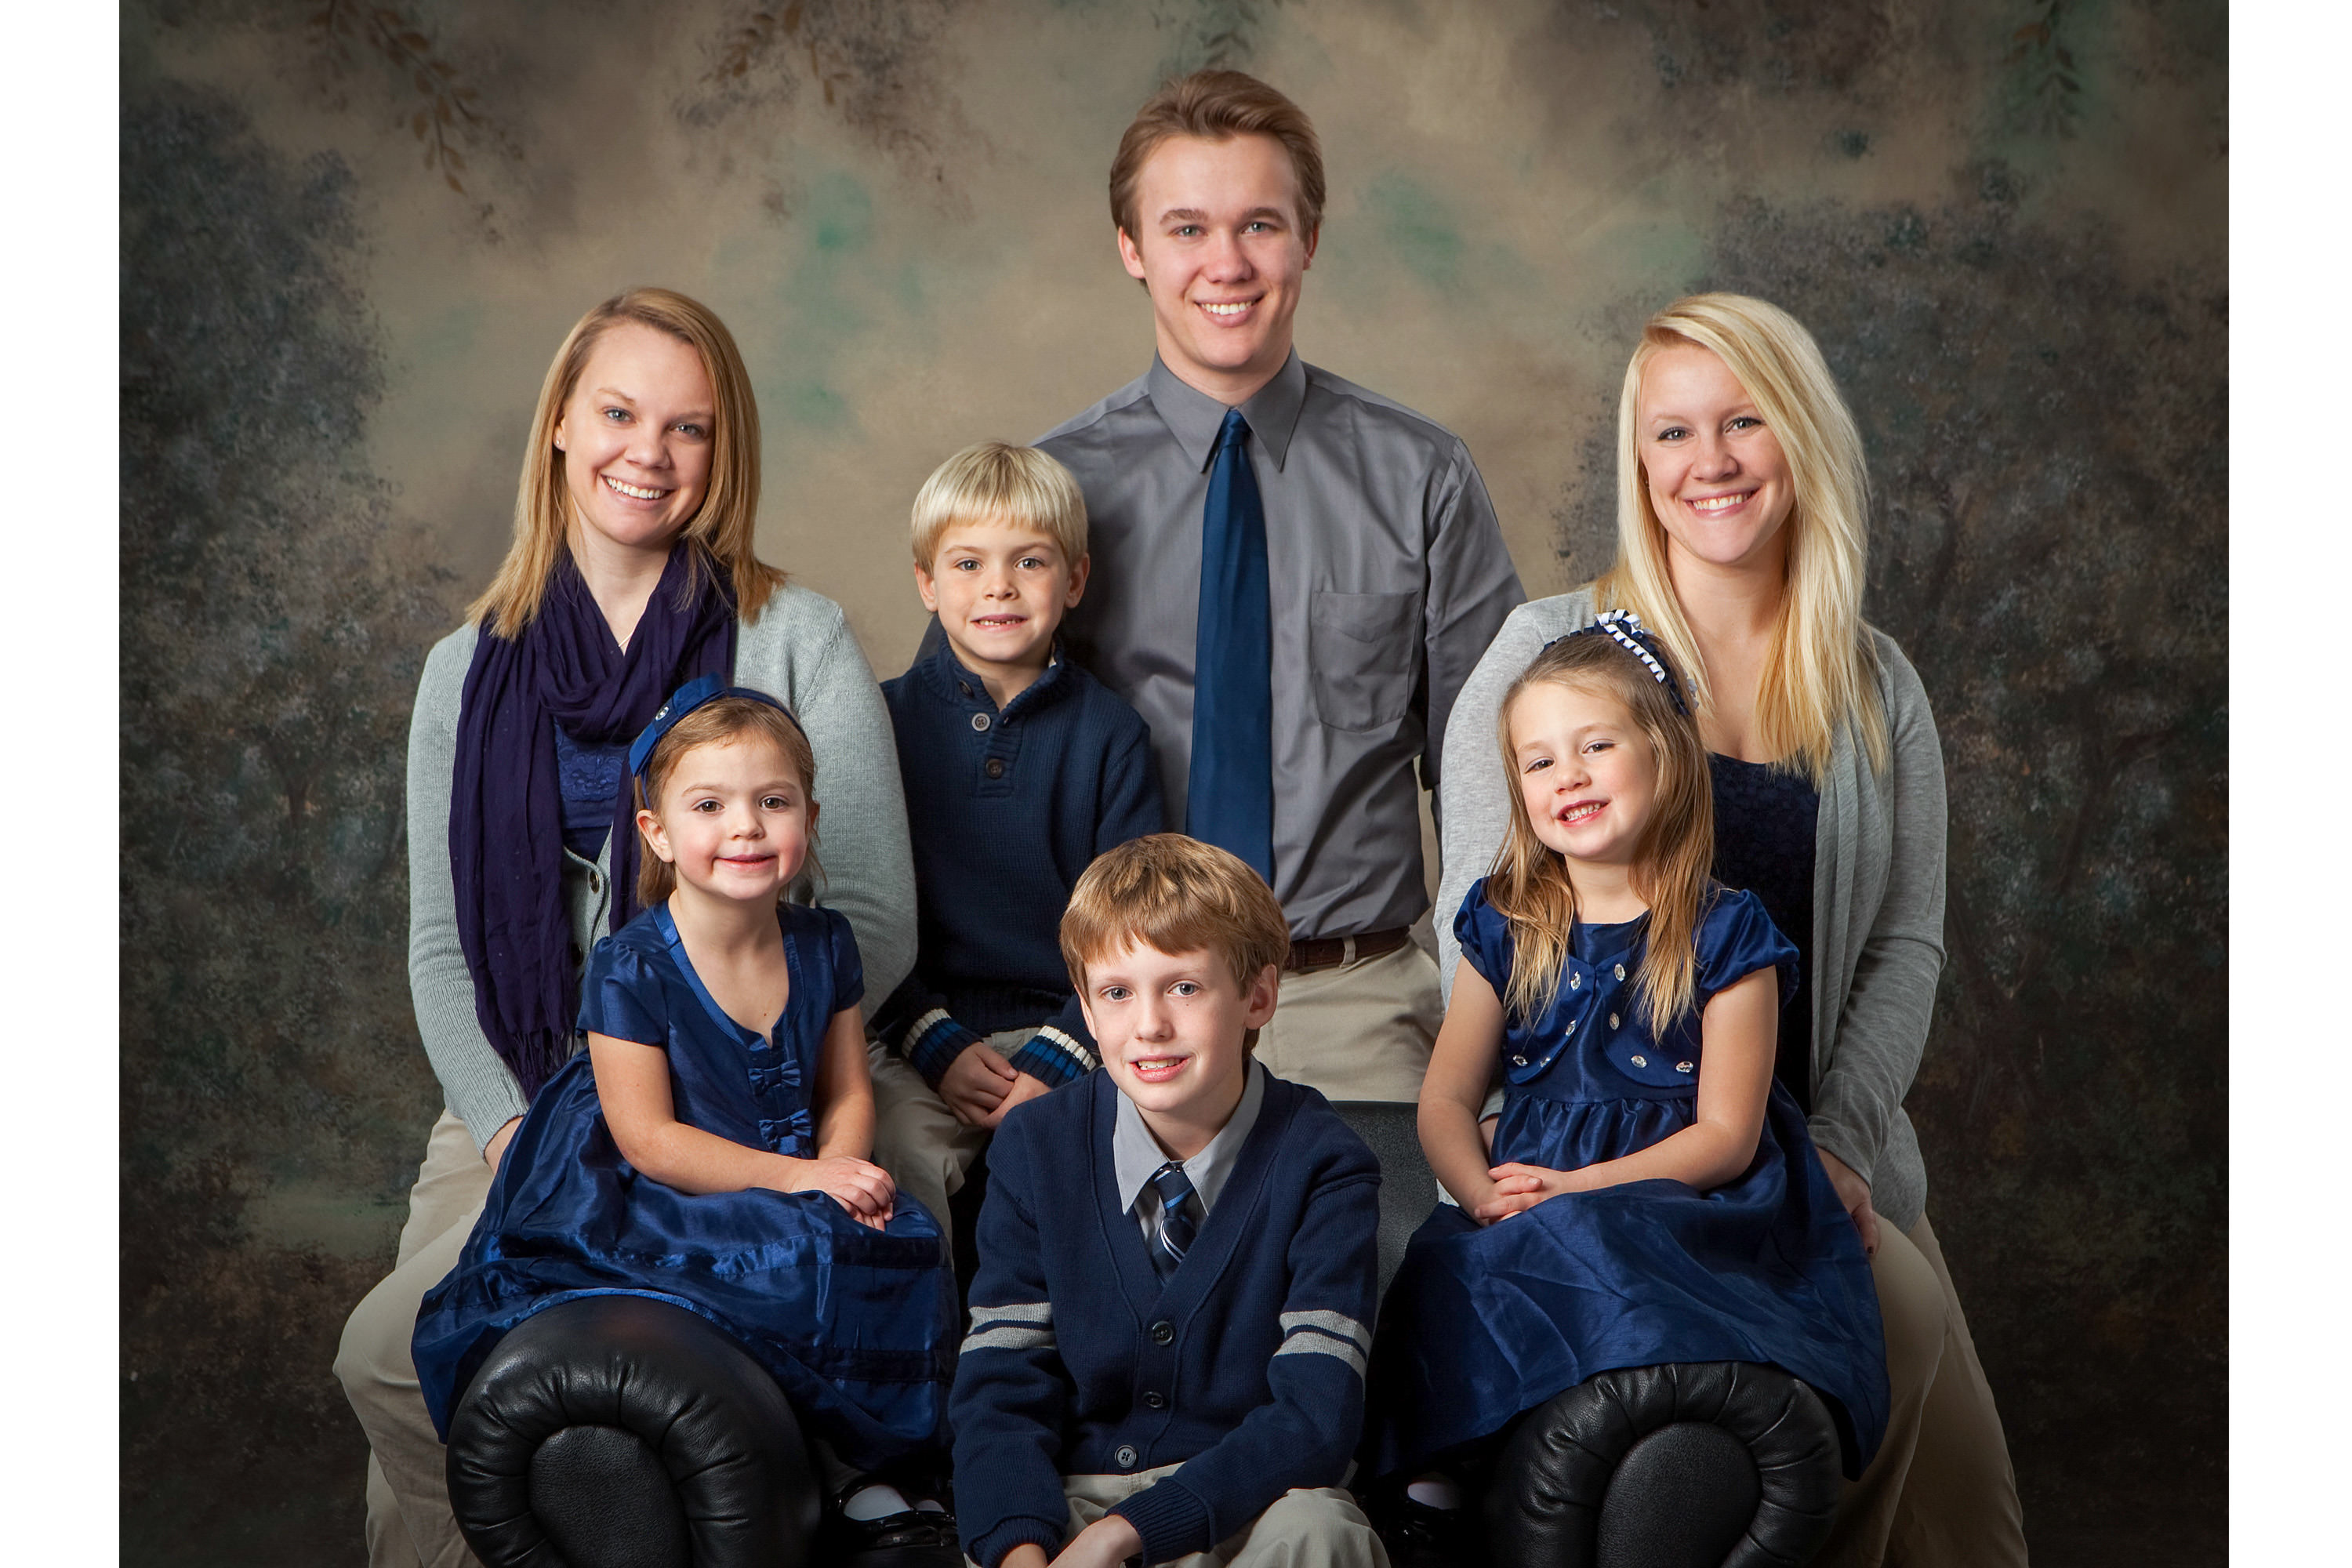 Family Portraits are our Specialty! - Ken Mar Studio